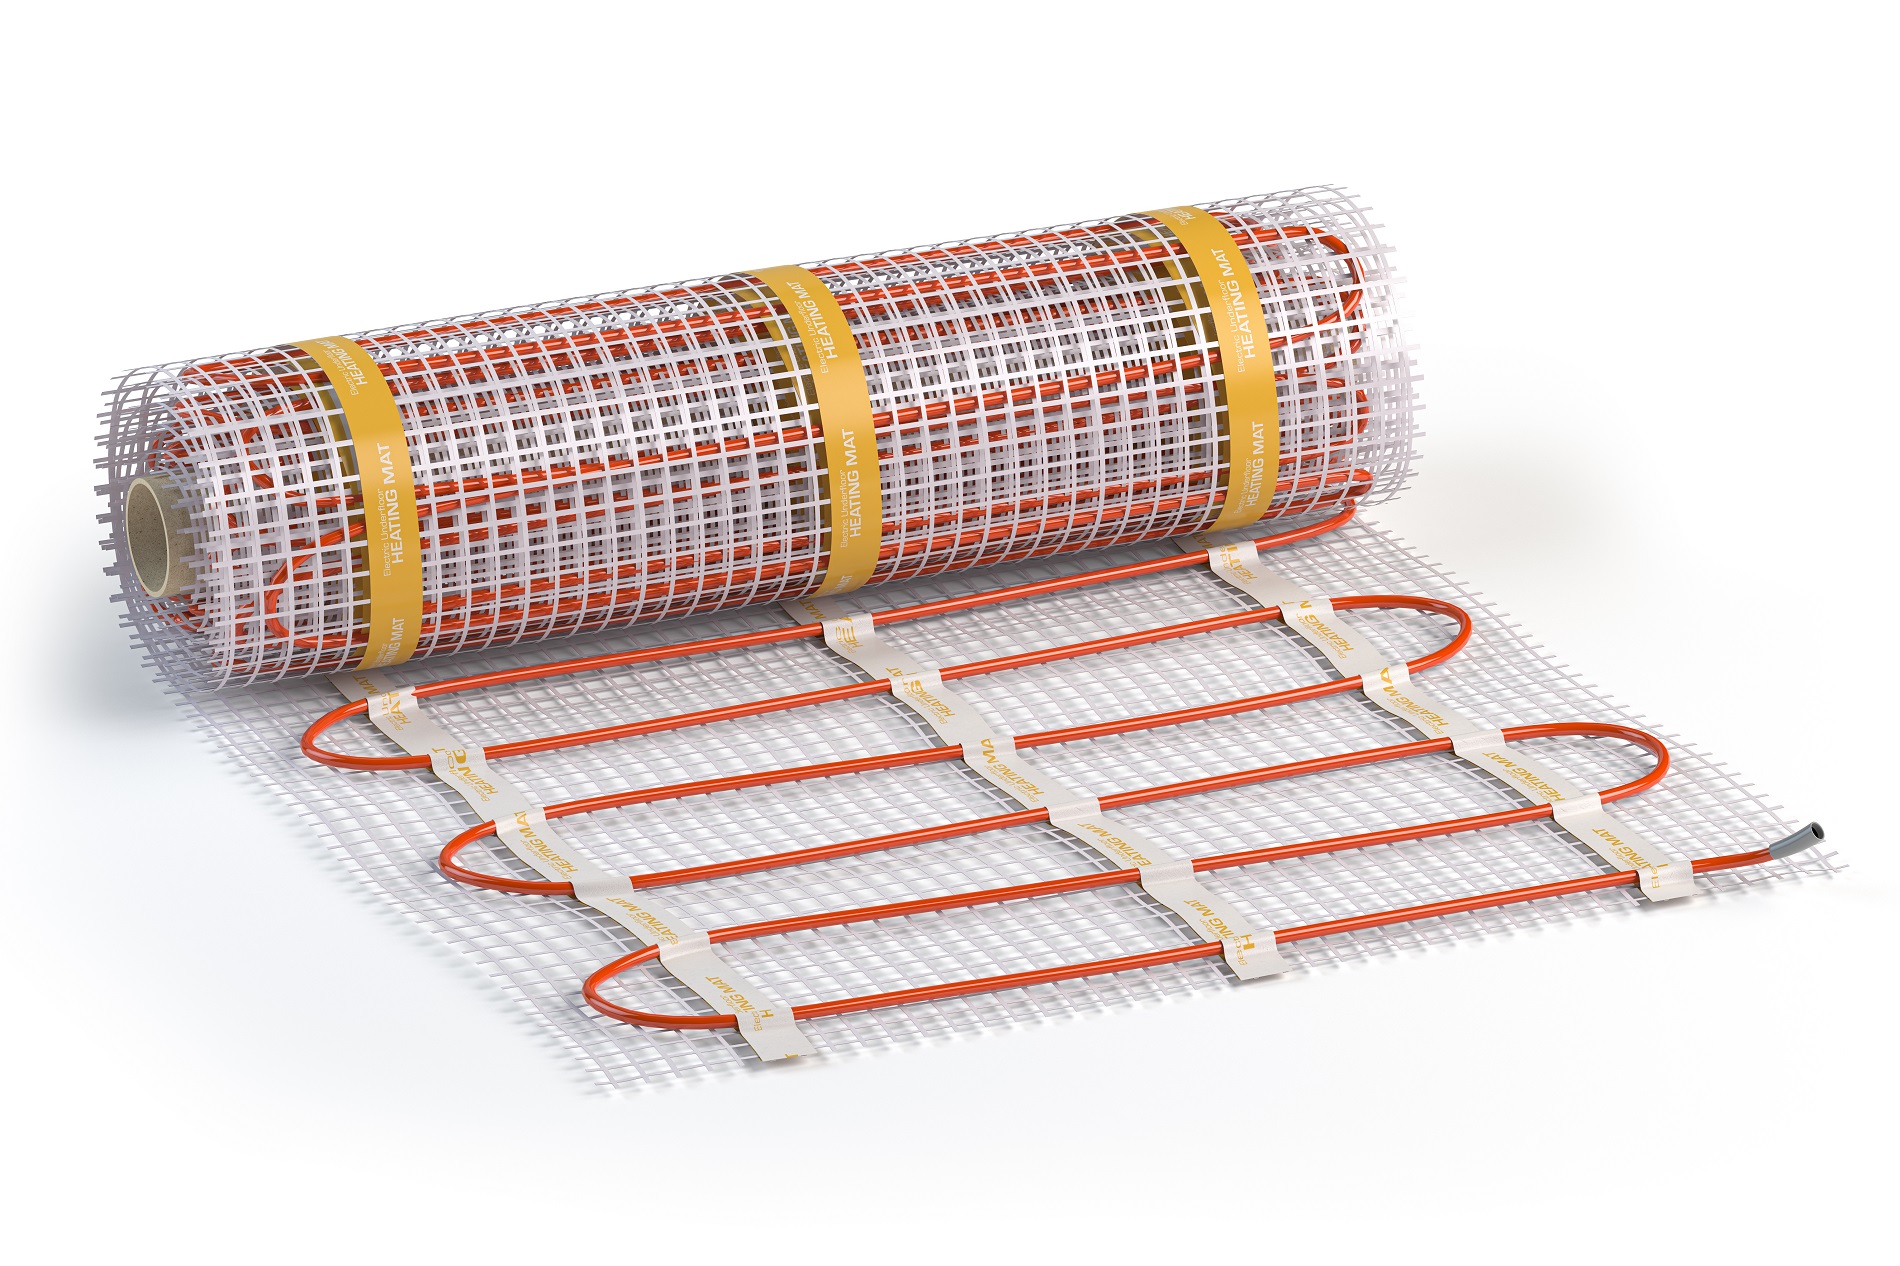 Mat electric floor heating system isolated on white. Heated warm